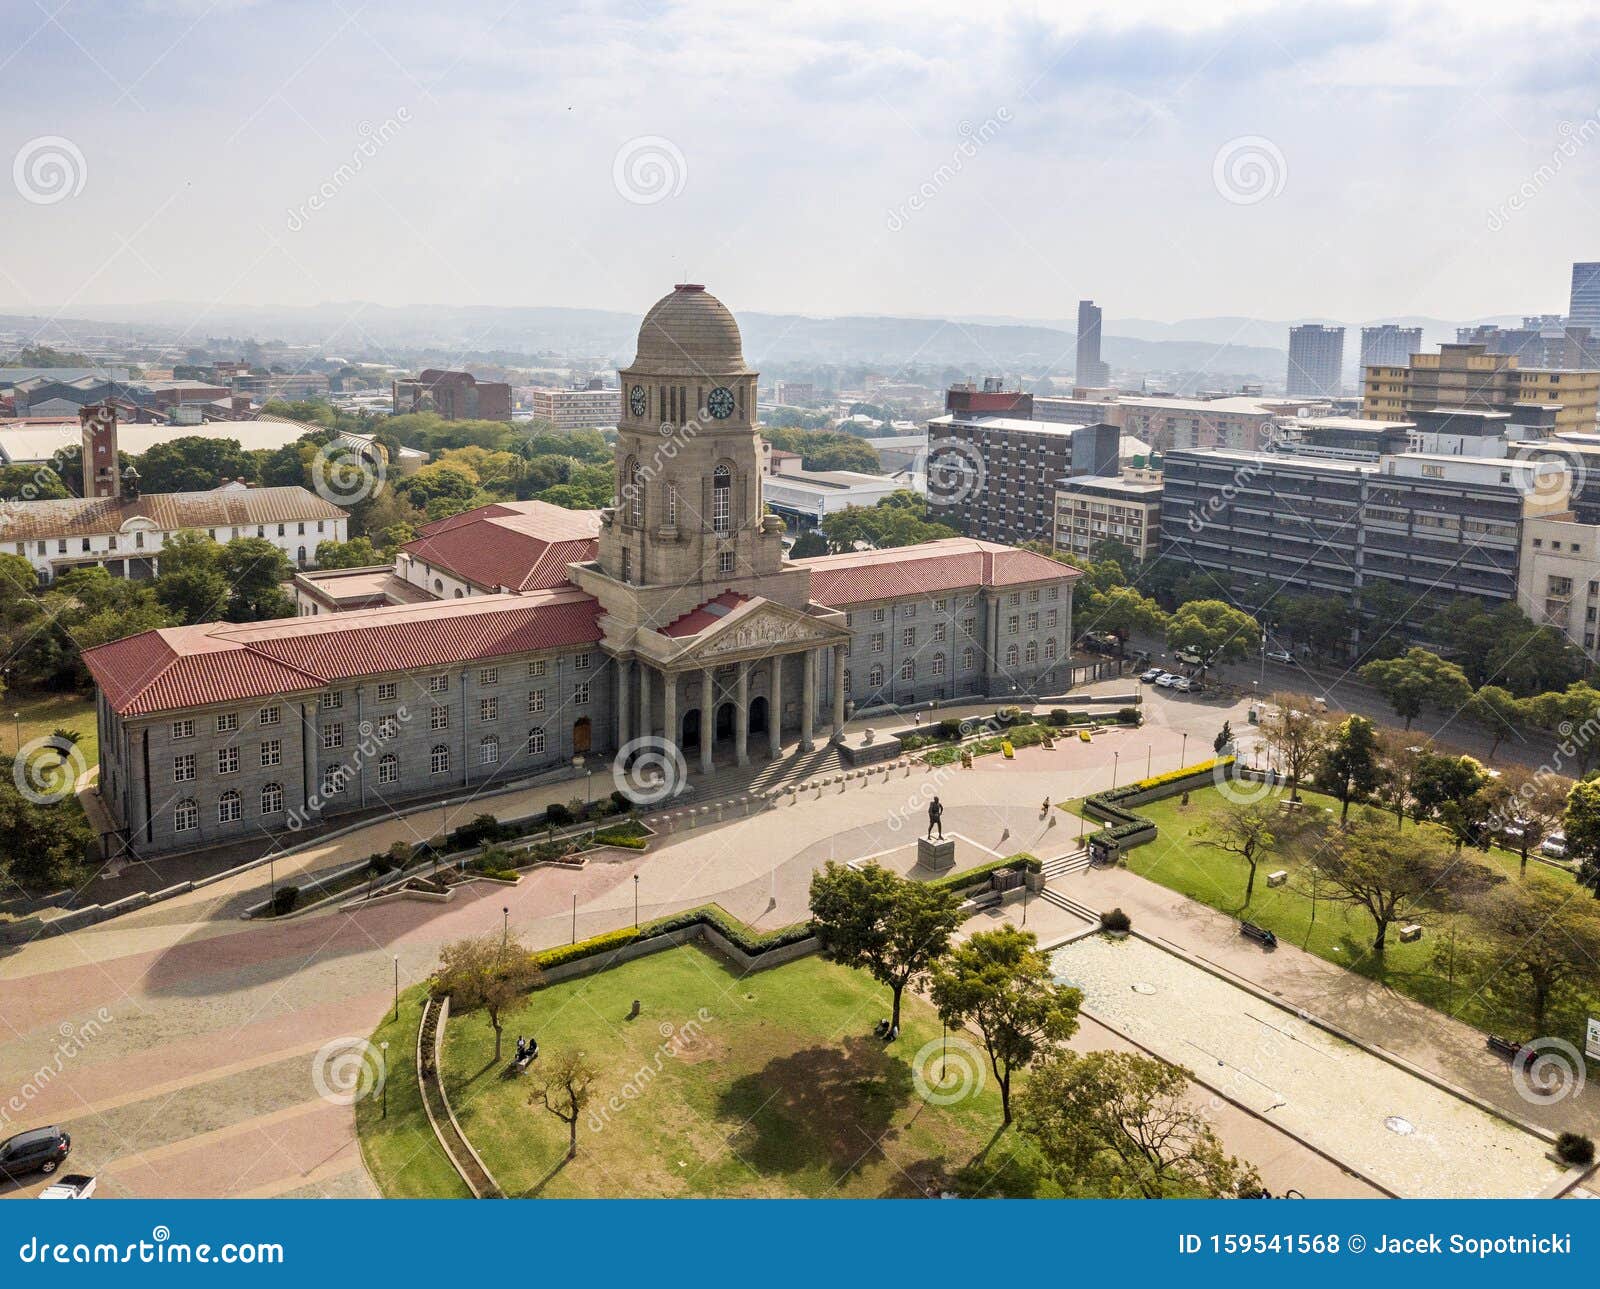 aerial view of tshwane city hall in the heart of pretoria, south africa